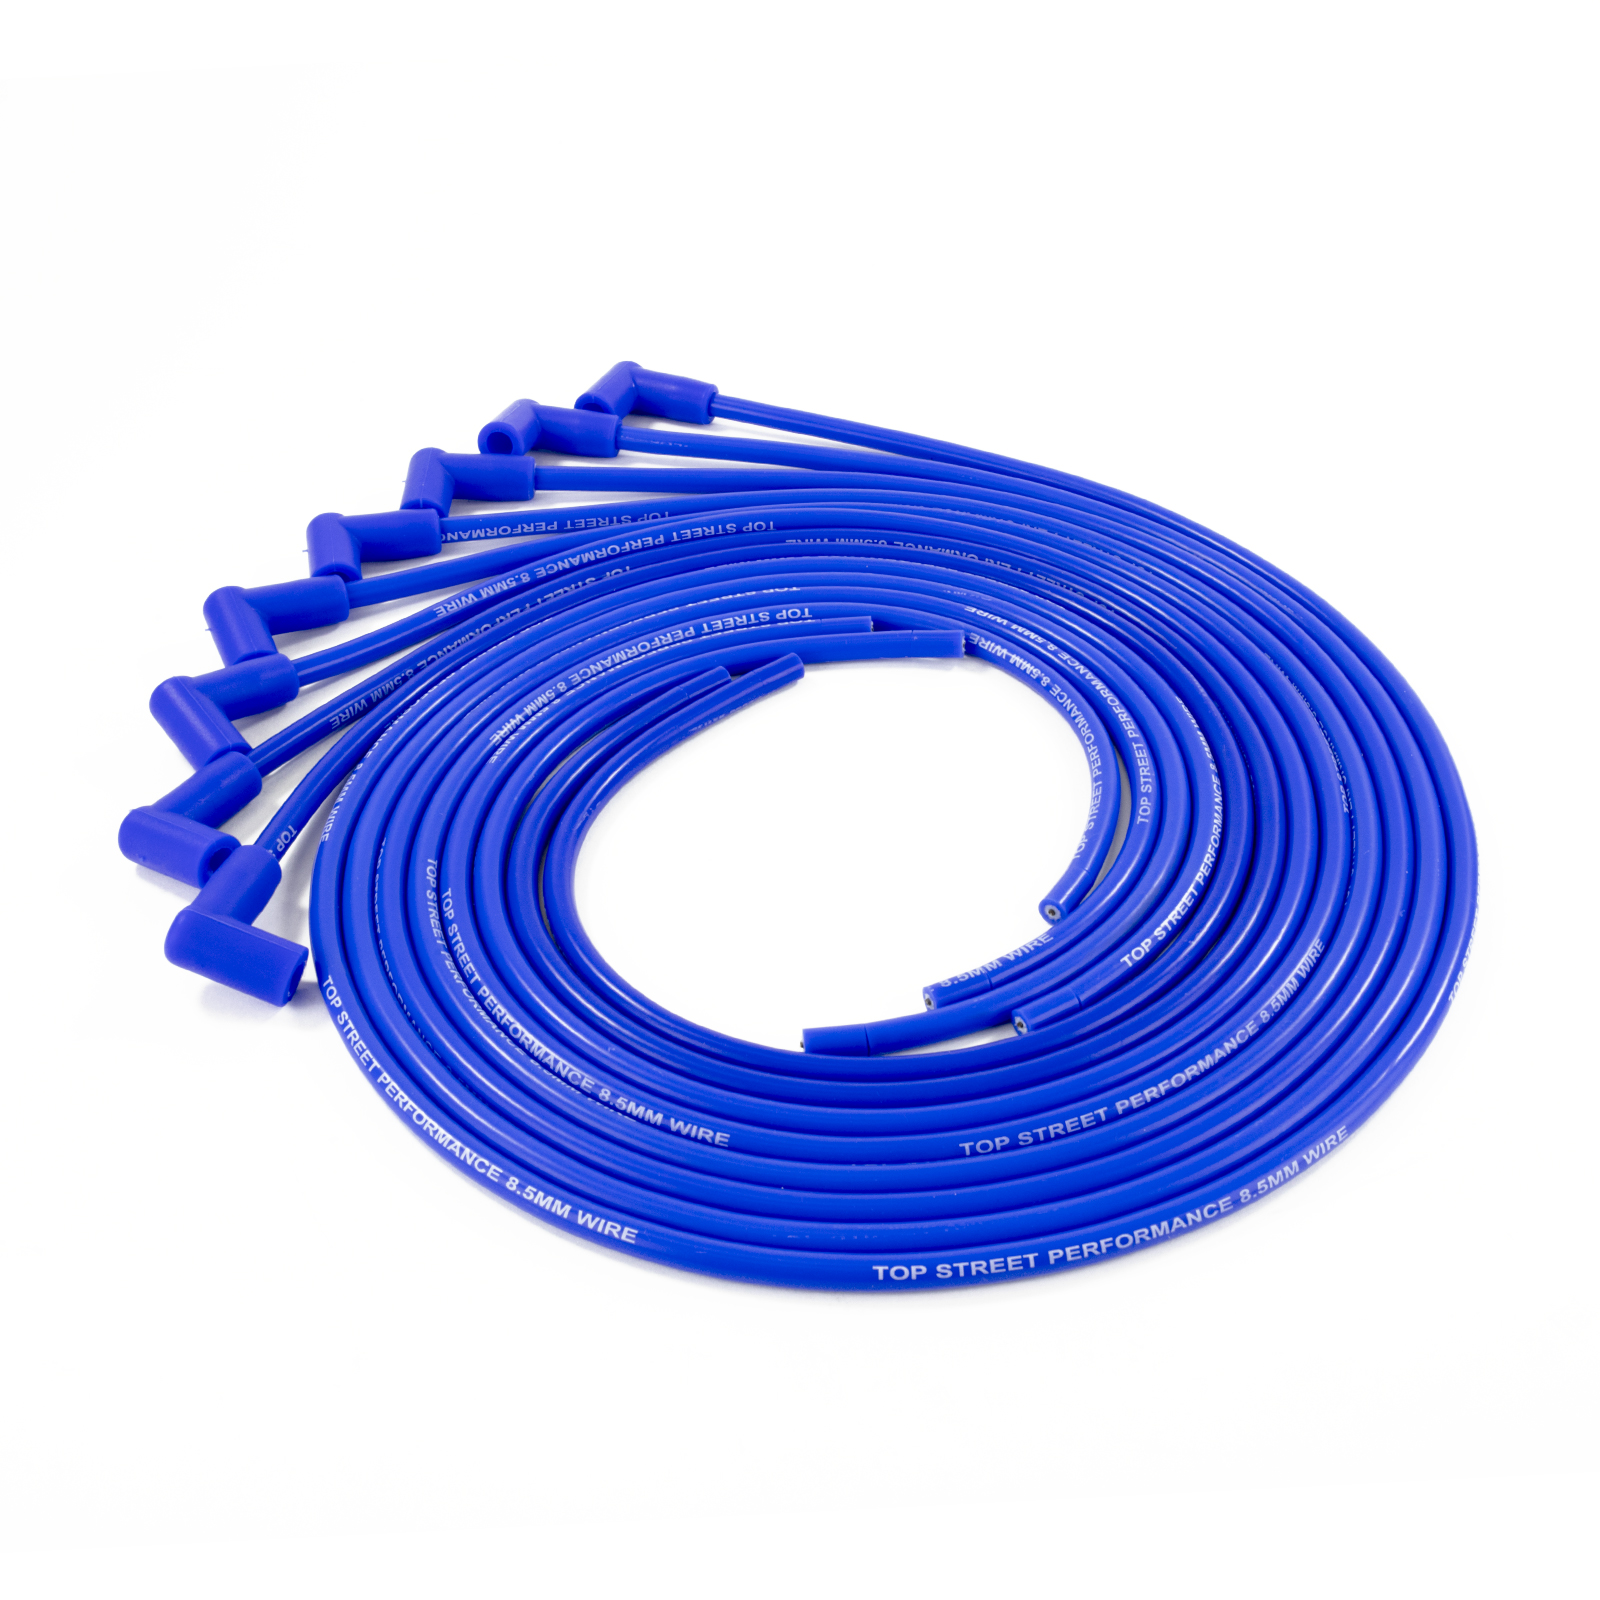 8.5mm Universal Blue Ignition Wires with 90? Plug Boots